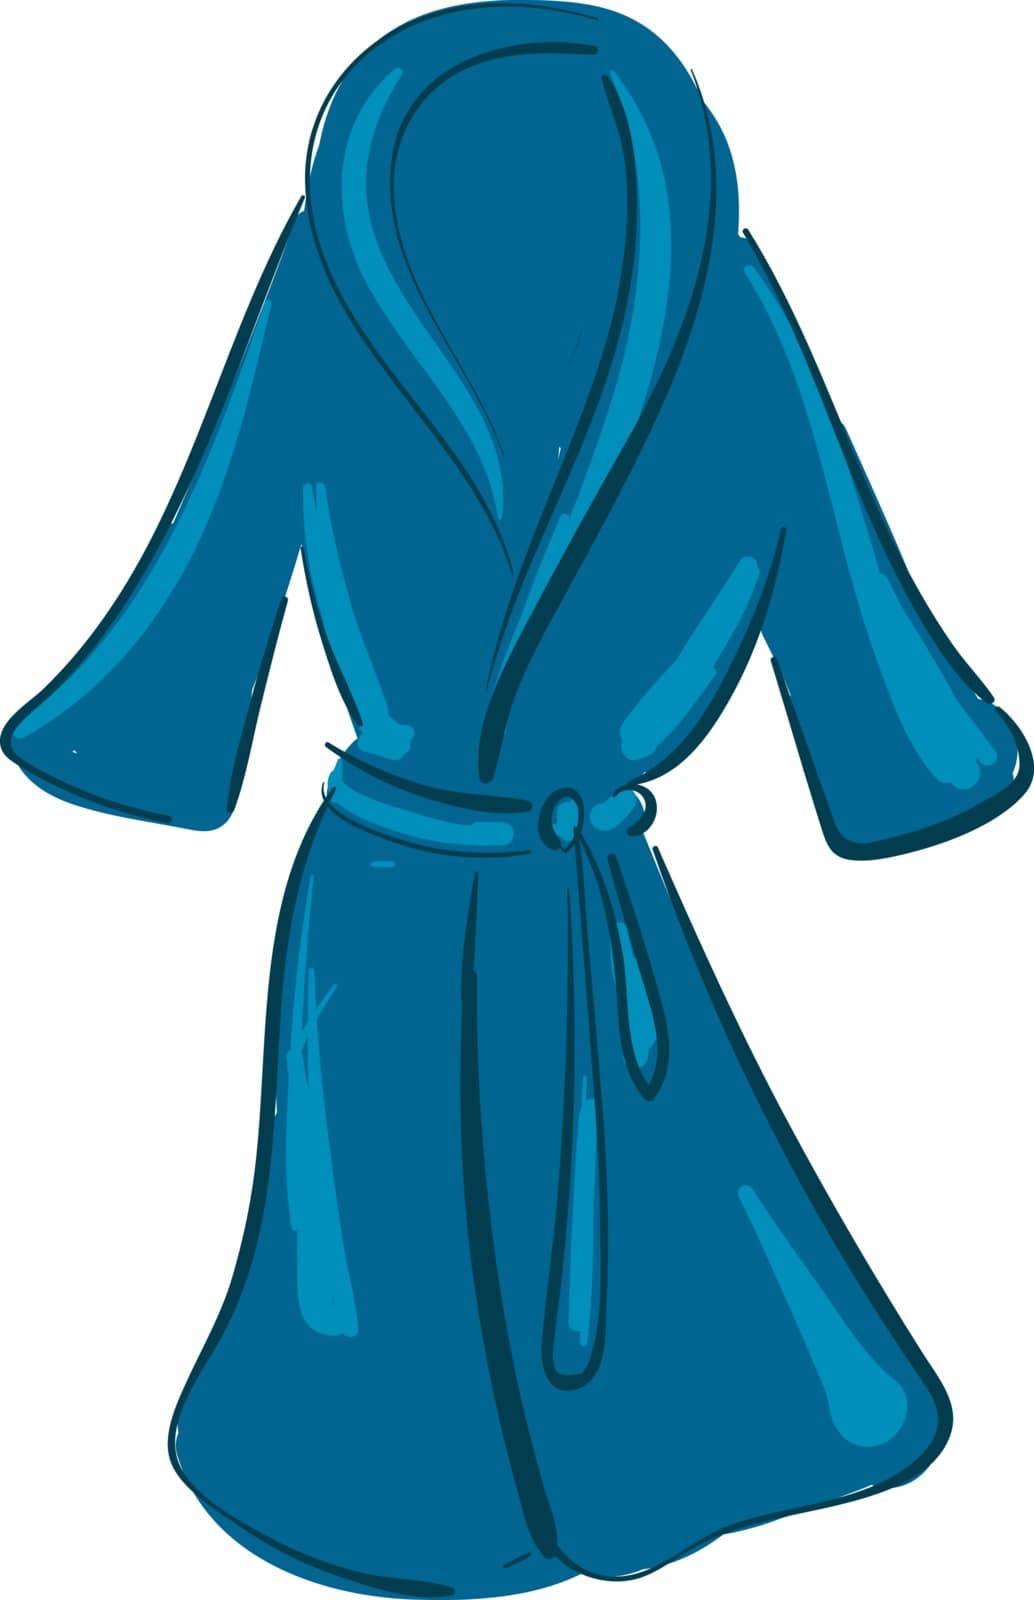 Clipart of a showcase blue-colored bathrobe over white backgroun by Morphart